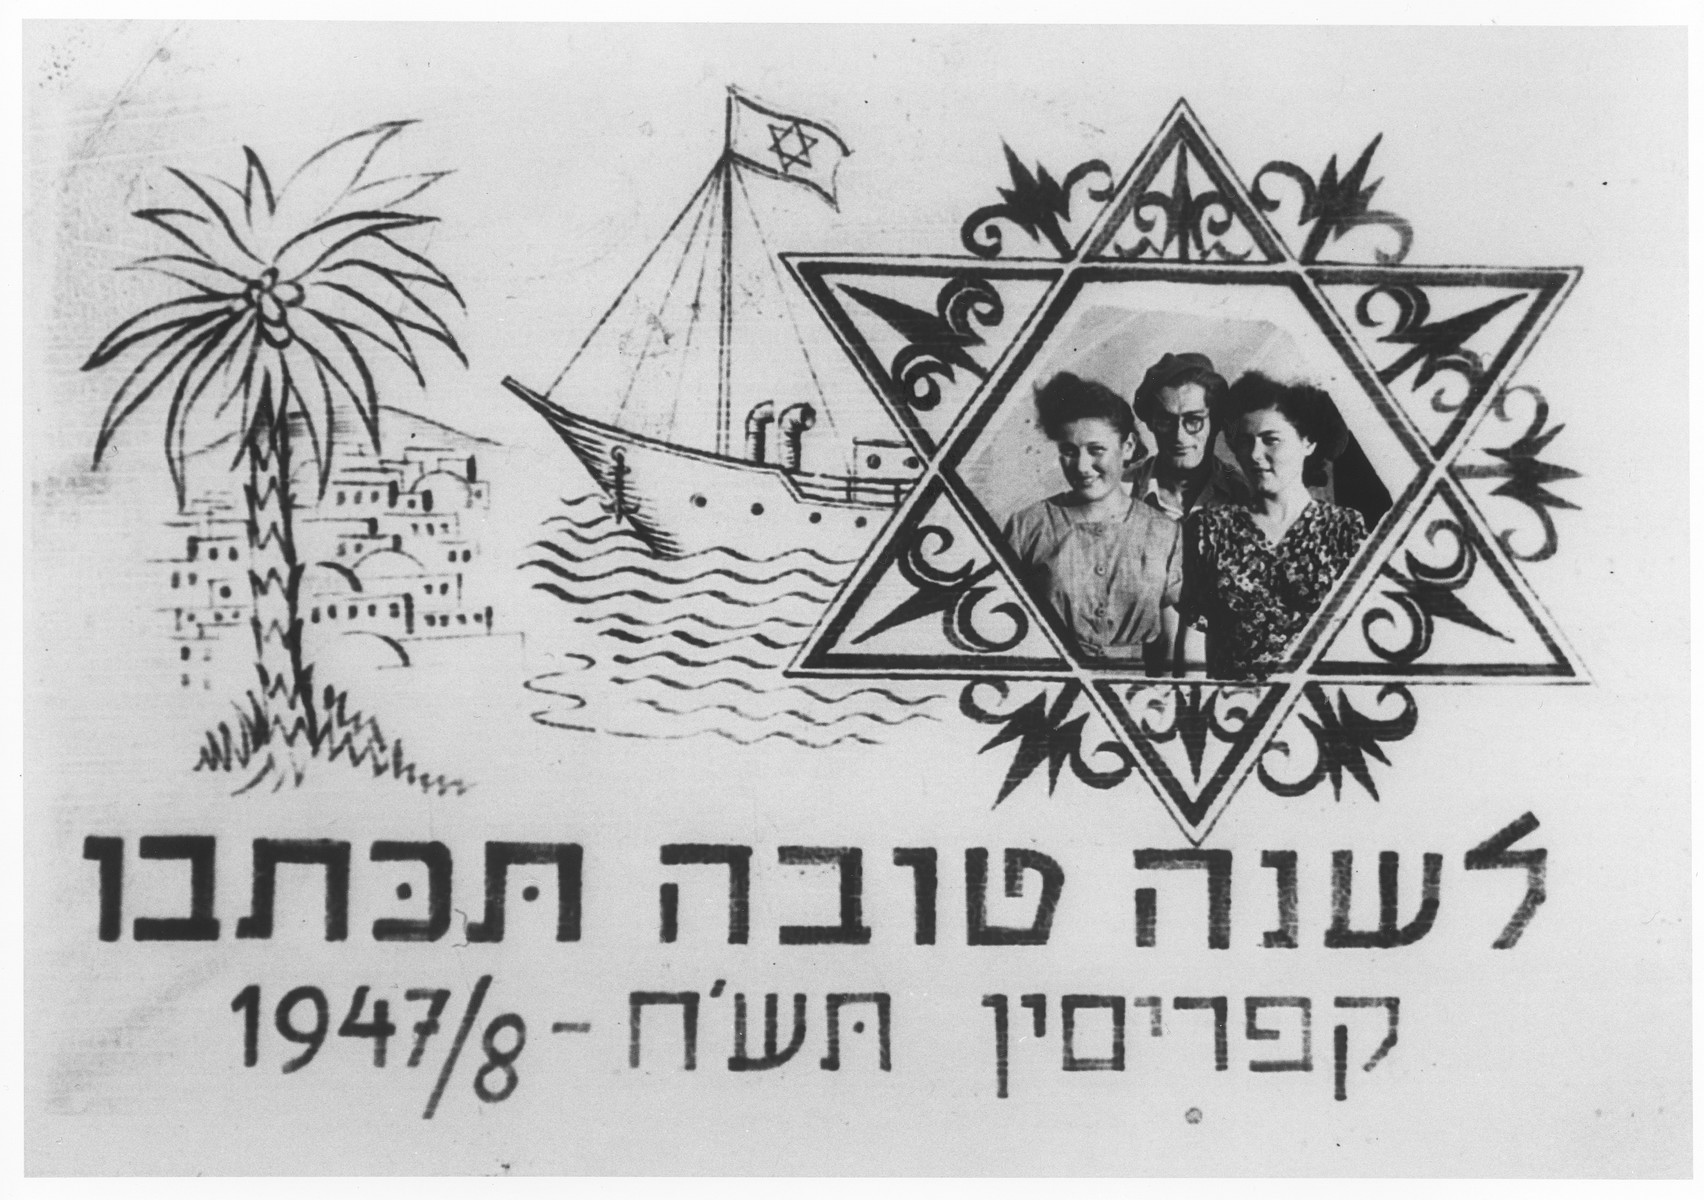 Personalized Jewish New Year's card that was sent from the Cyprus detention camp.

The greeting card bears the photograph of  Pnina, Meir and Leah Halpern (pictured left to right), Jewish DPs from the illegal immigration ship, Theodor Herzl, who were interned on Cyprus.